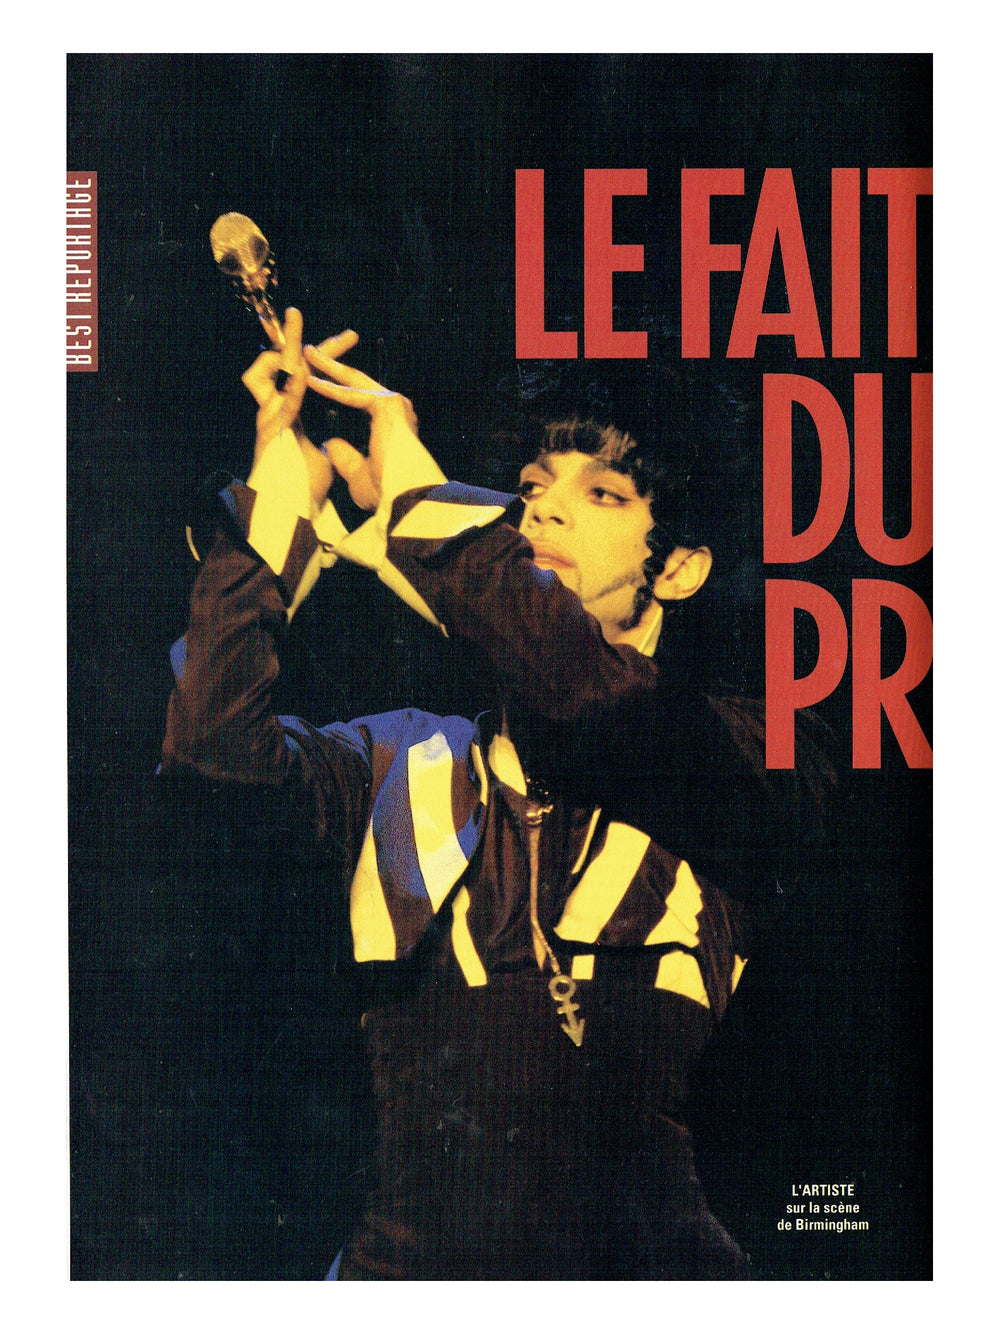 Prince Best Magazine September 1993 French Cover Insert & 4 Page Article